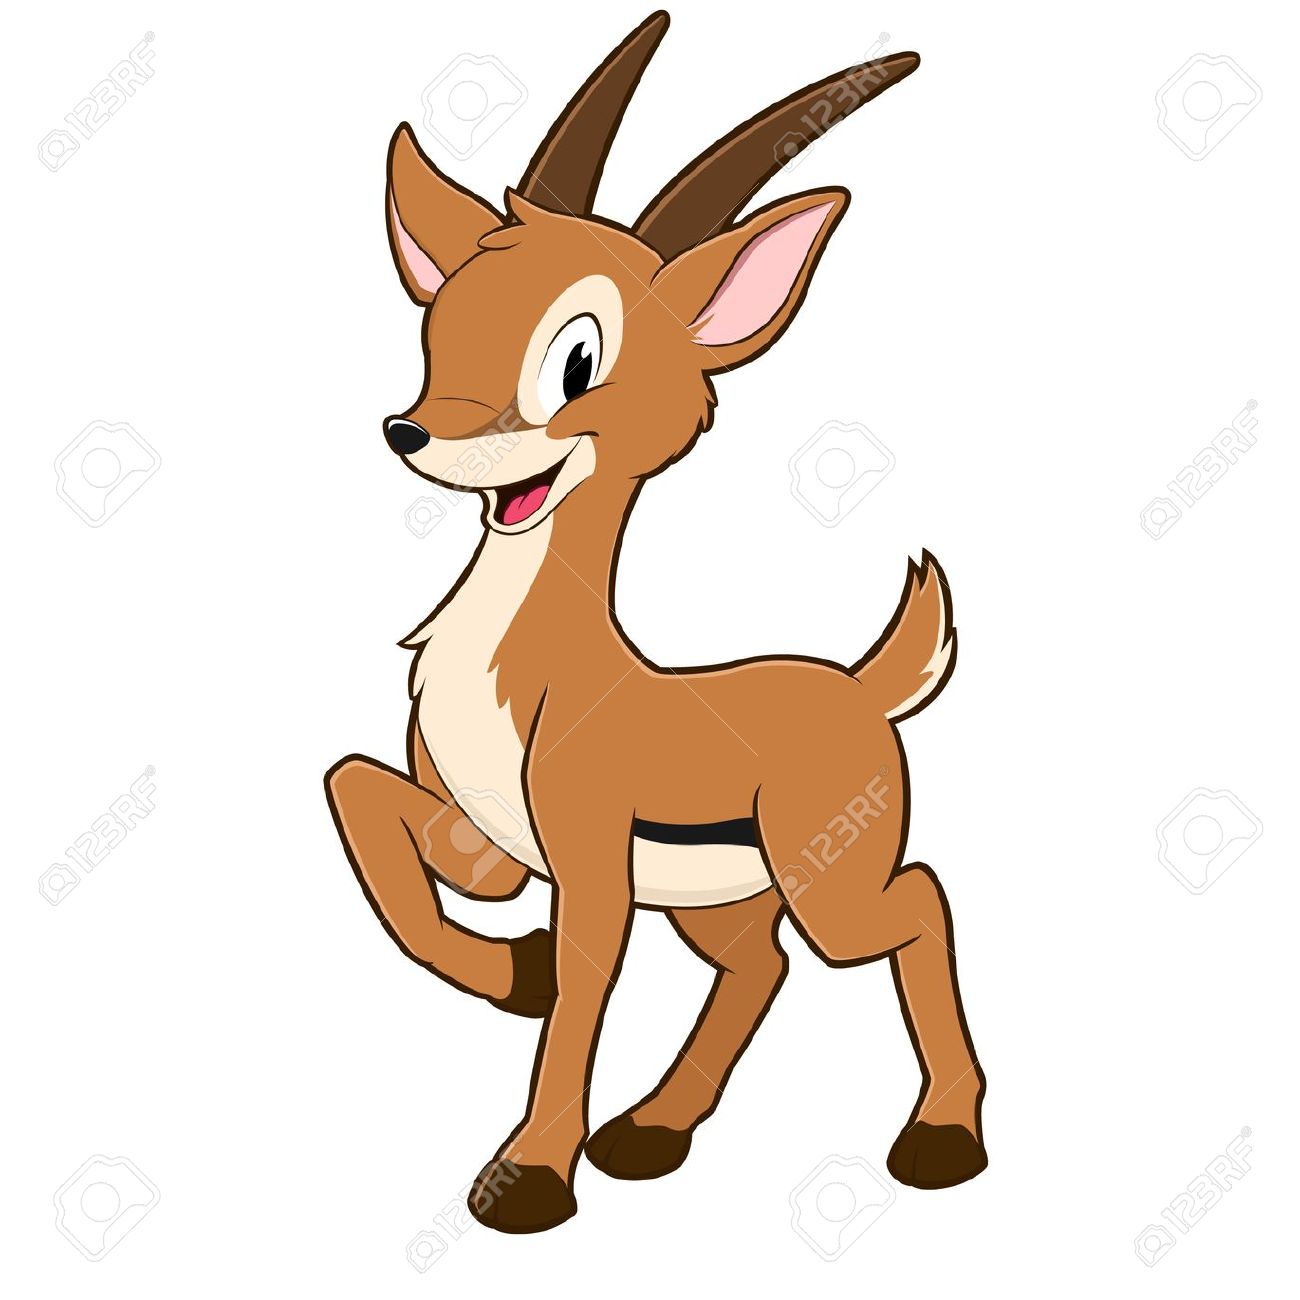 Gazelle clipart #14, Download drawings